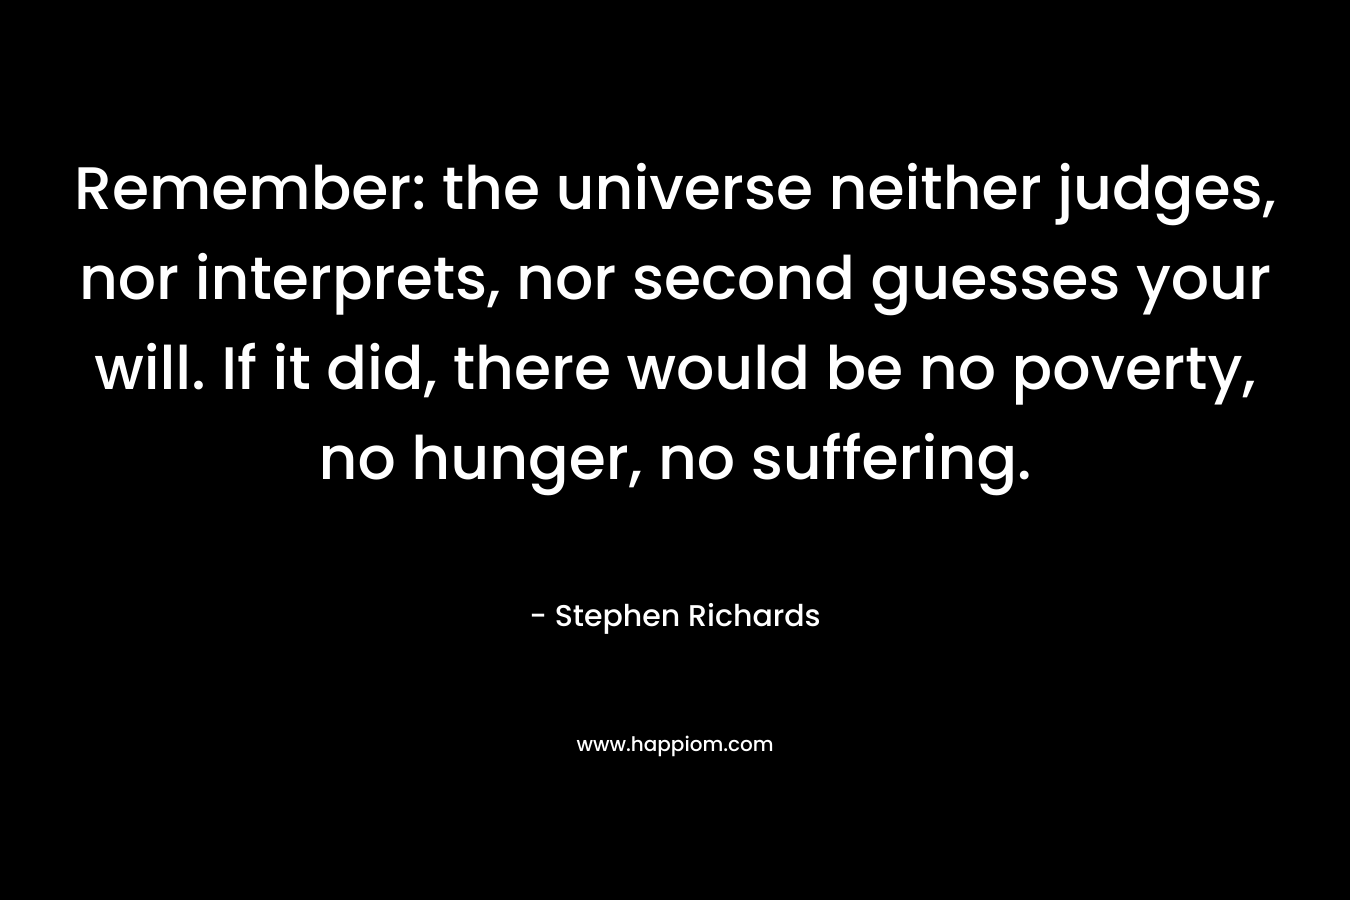 Remember: the universe neither judges, nor interprets, nor second guesses your will. If it did, there would be no poverty, no hunger, no suffering. – Stephen Richards